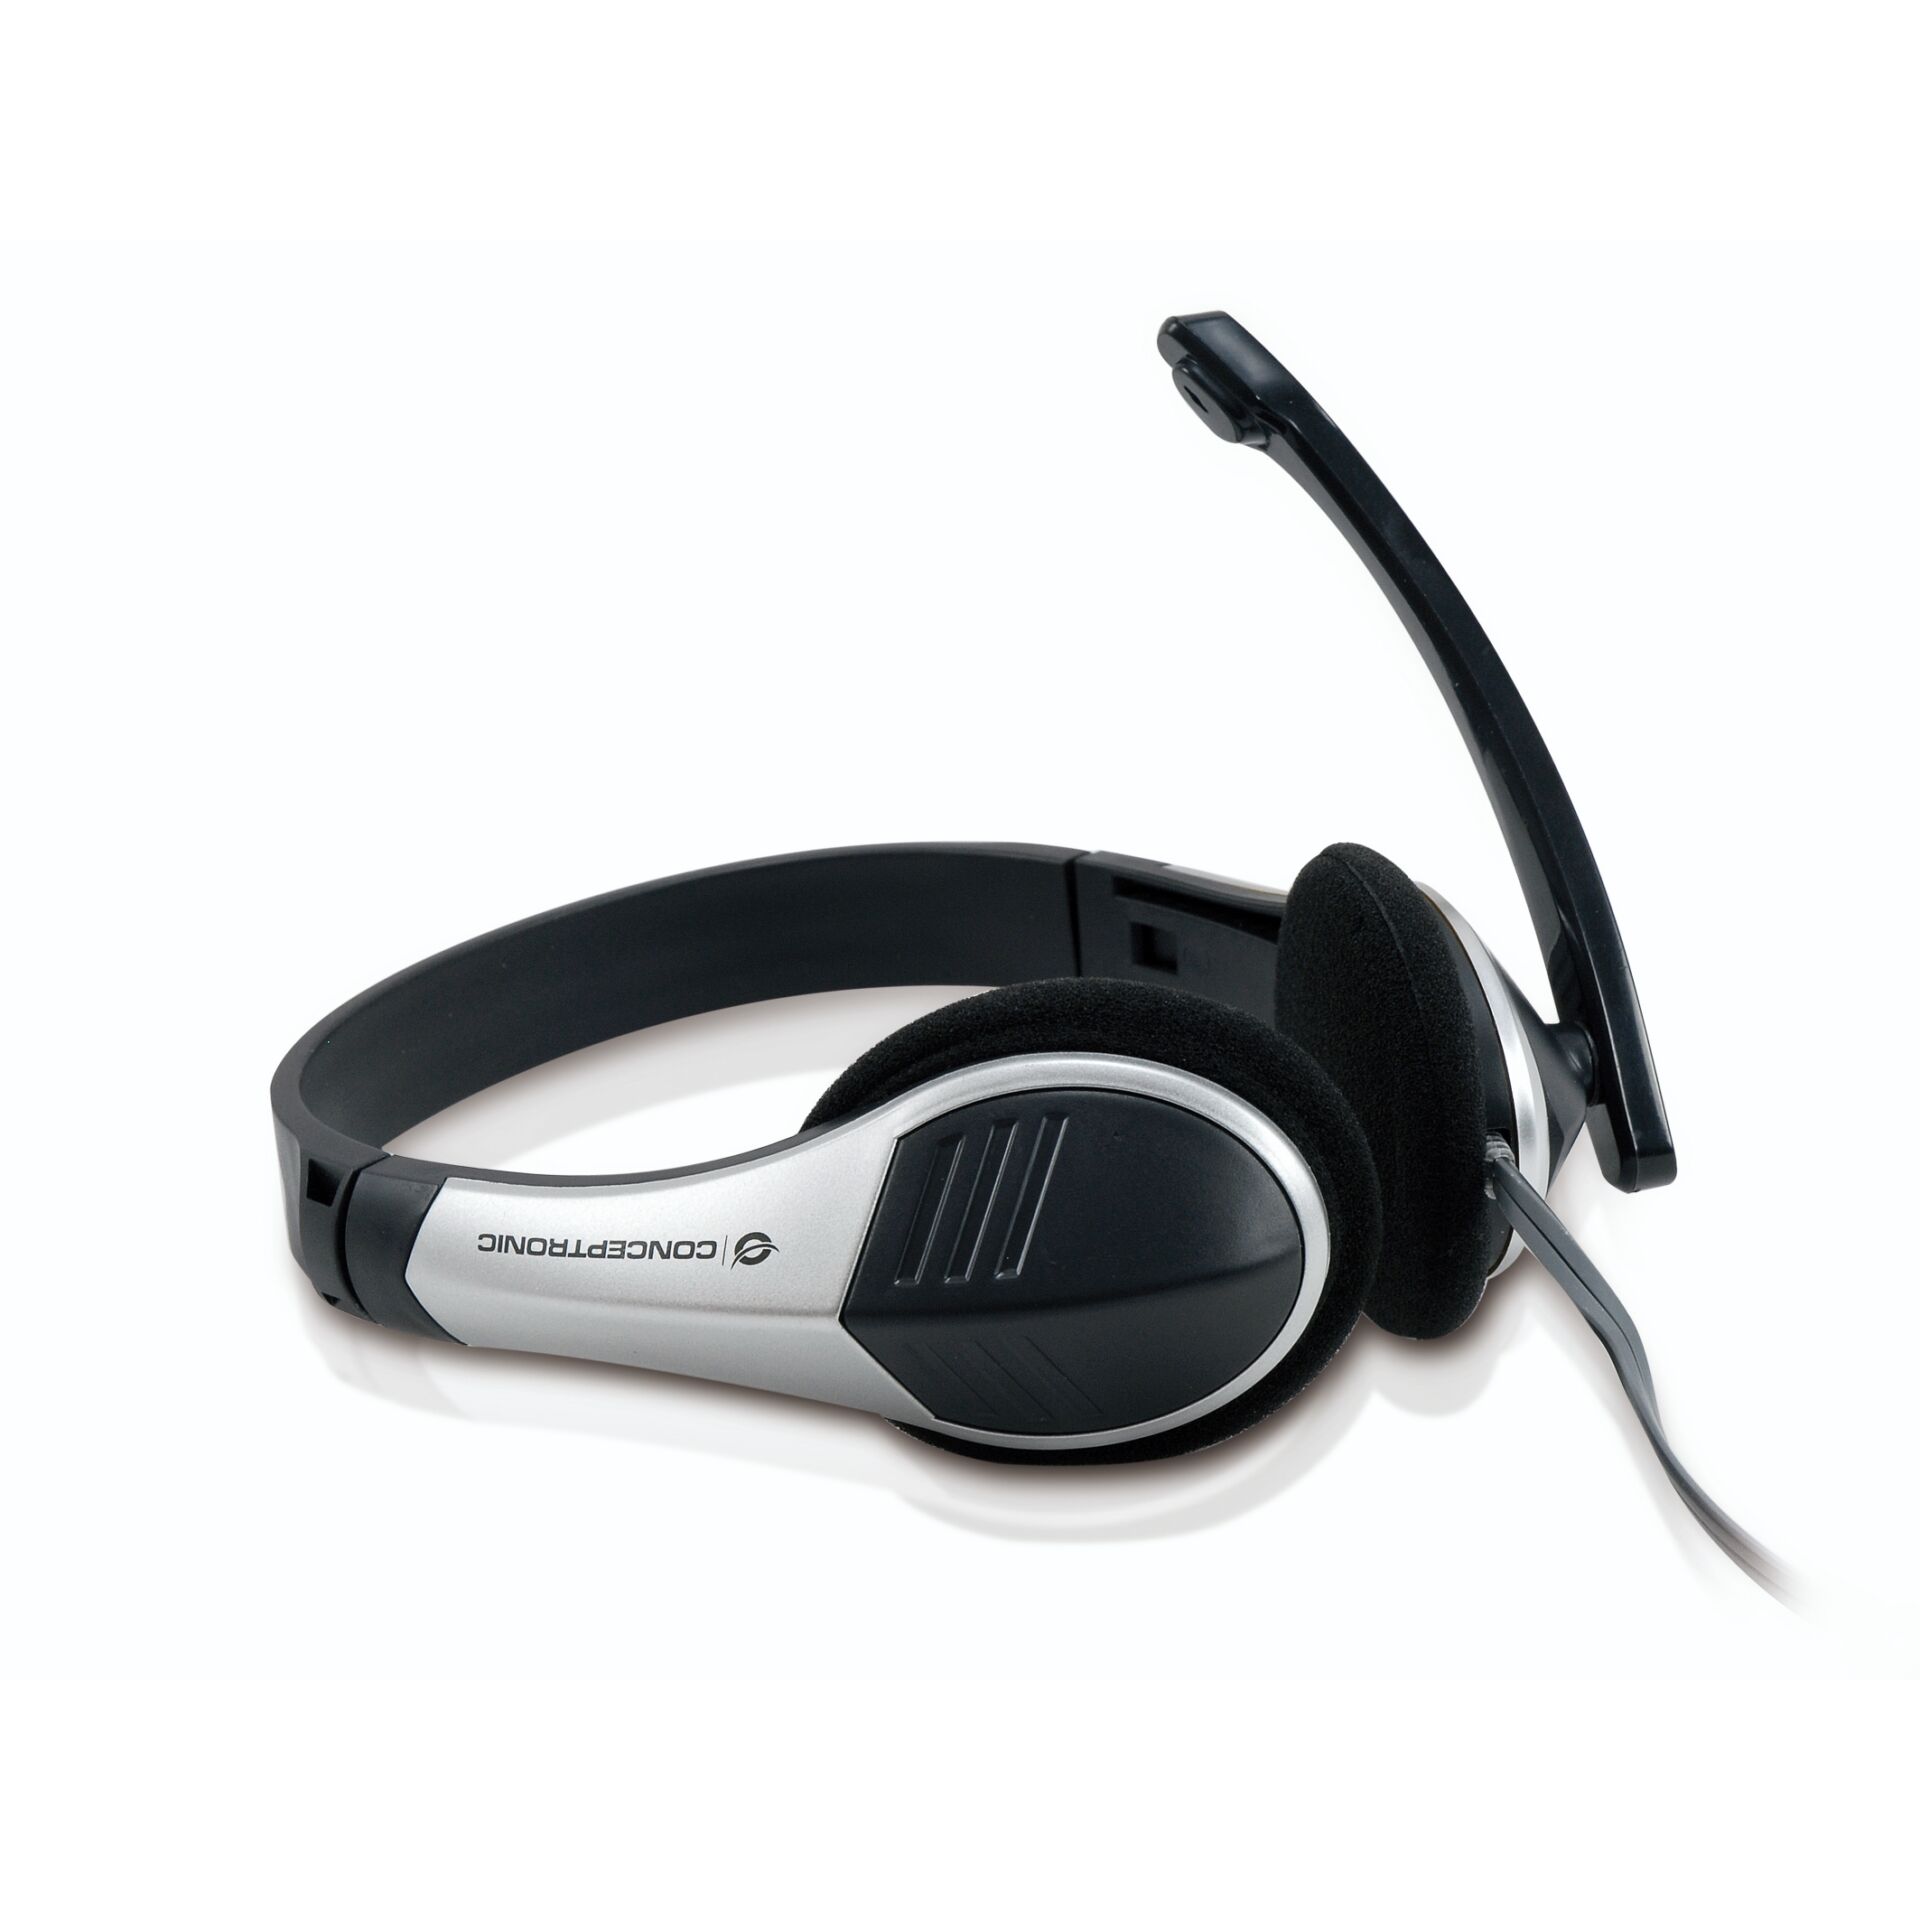 Conceptronic, Stereo-Headset, On-Ear 